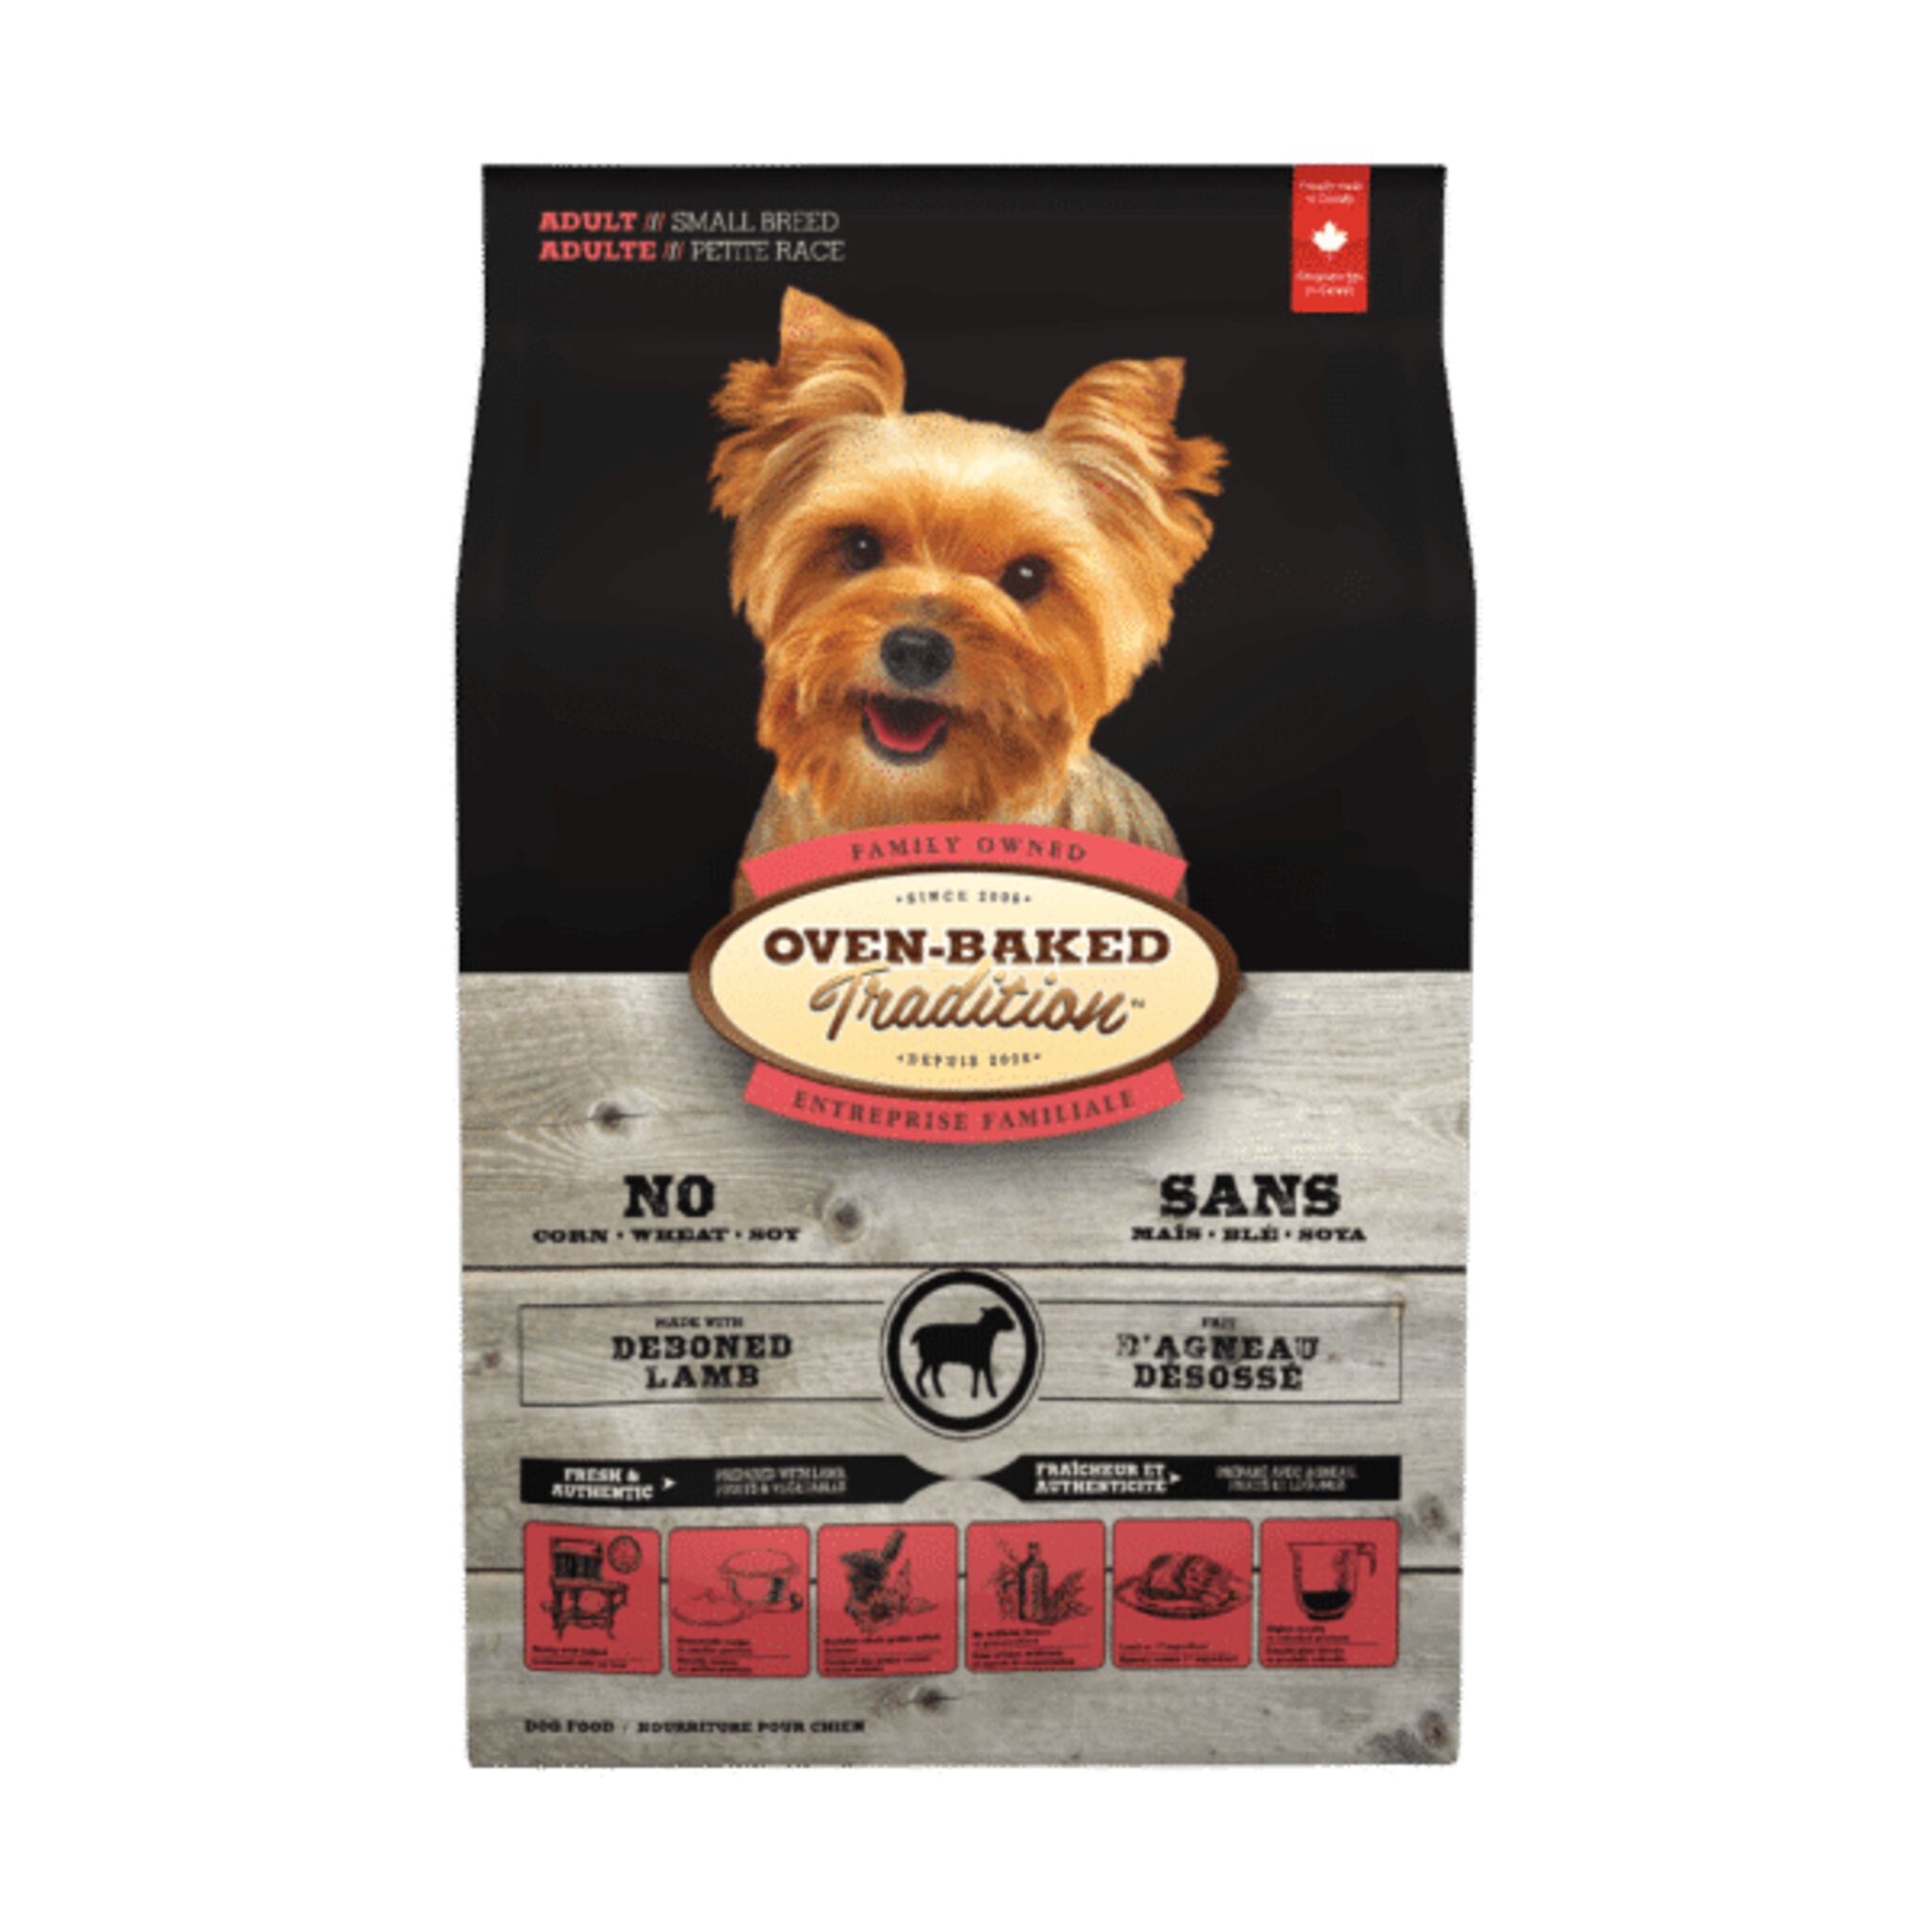 A bag of Oven-Baked Tradition dog food, adult small breed, lamb recipe, 5 lb.